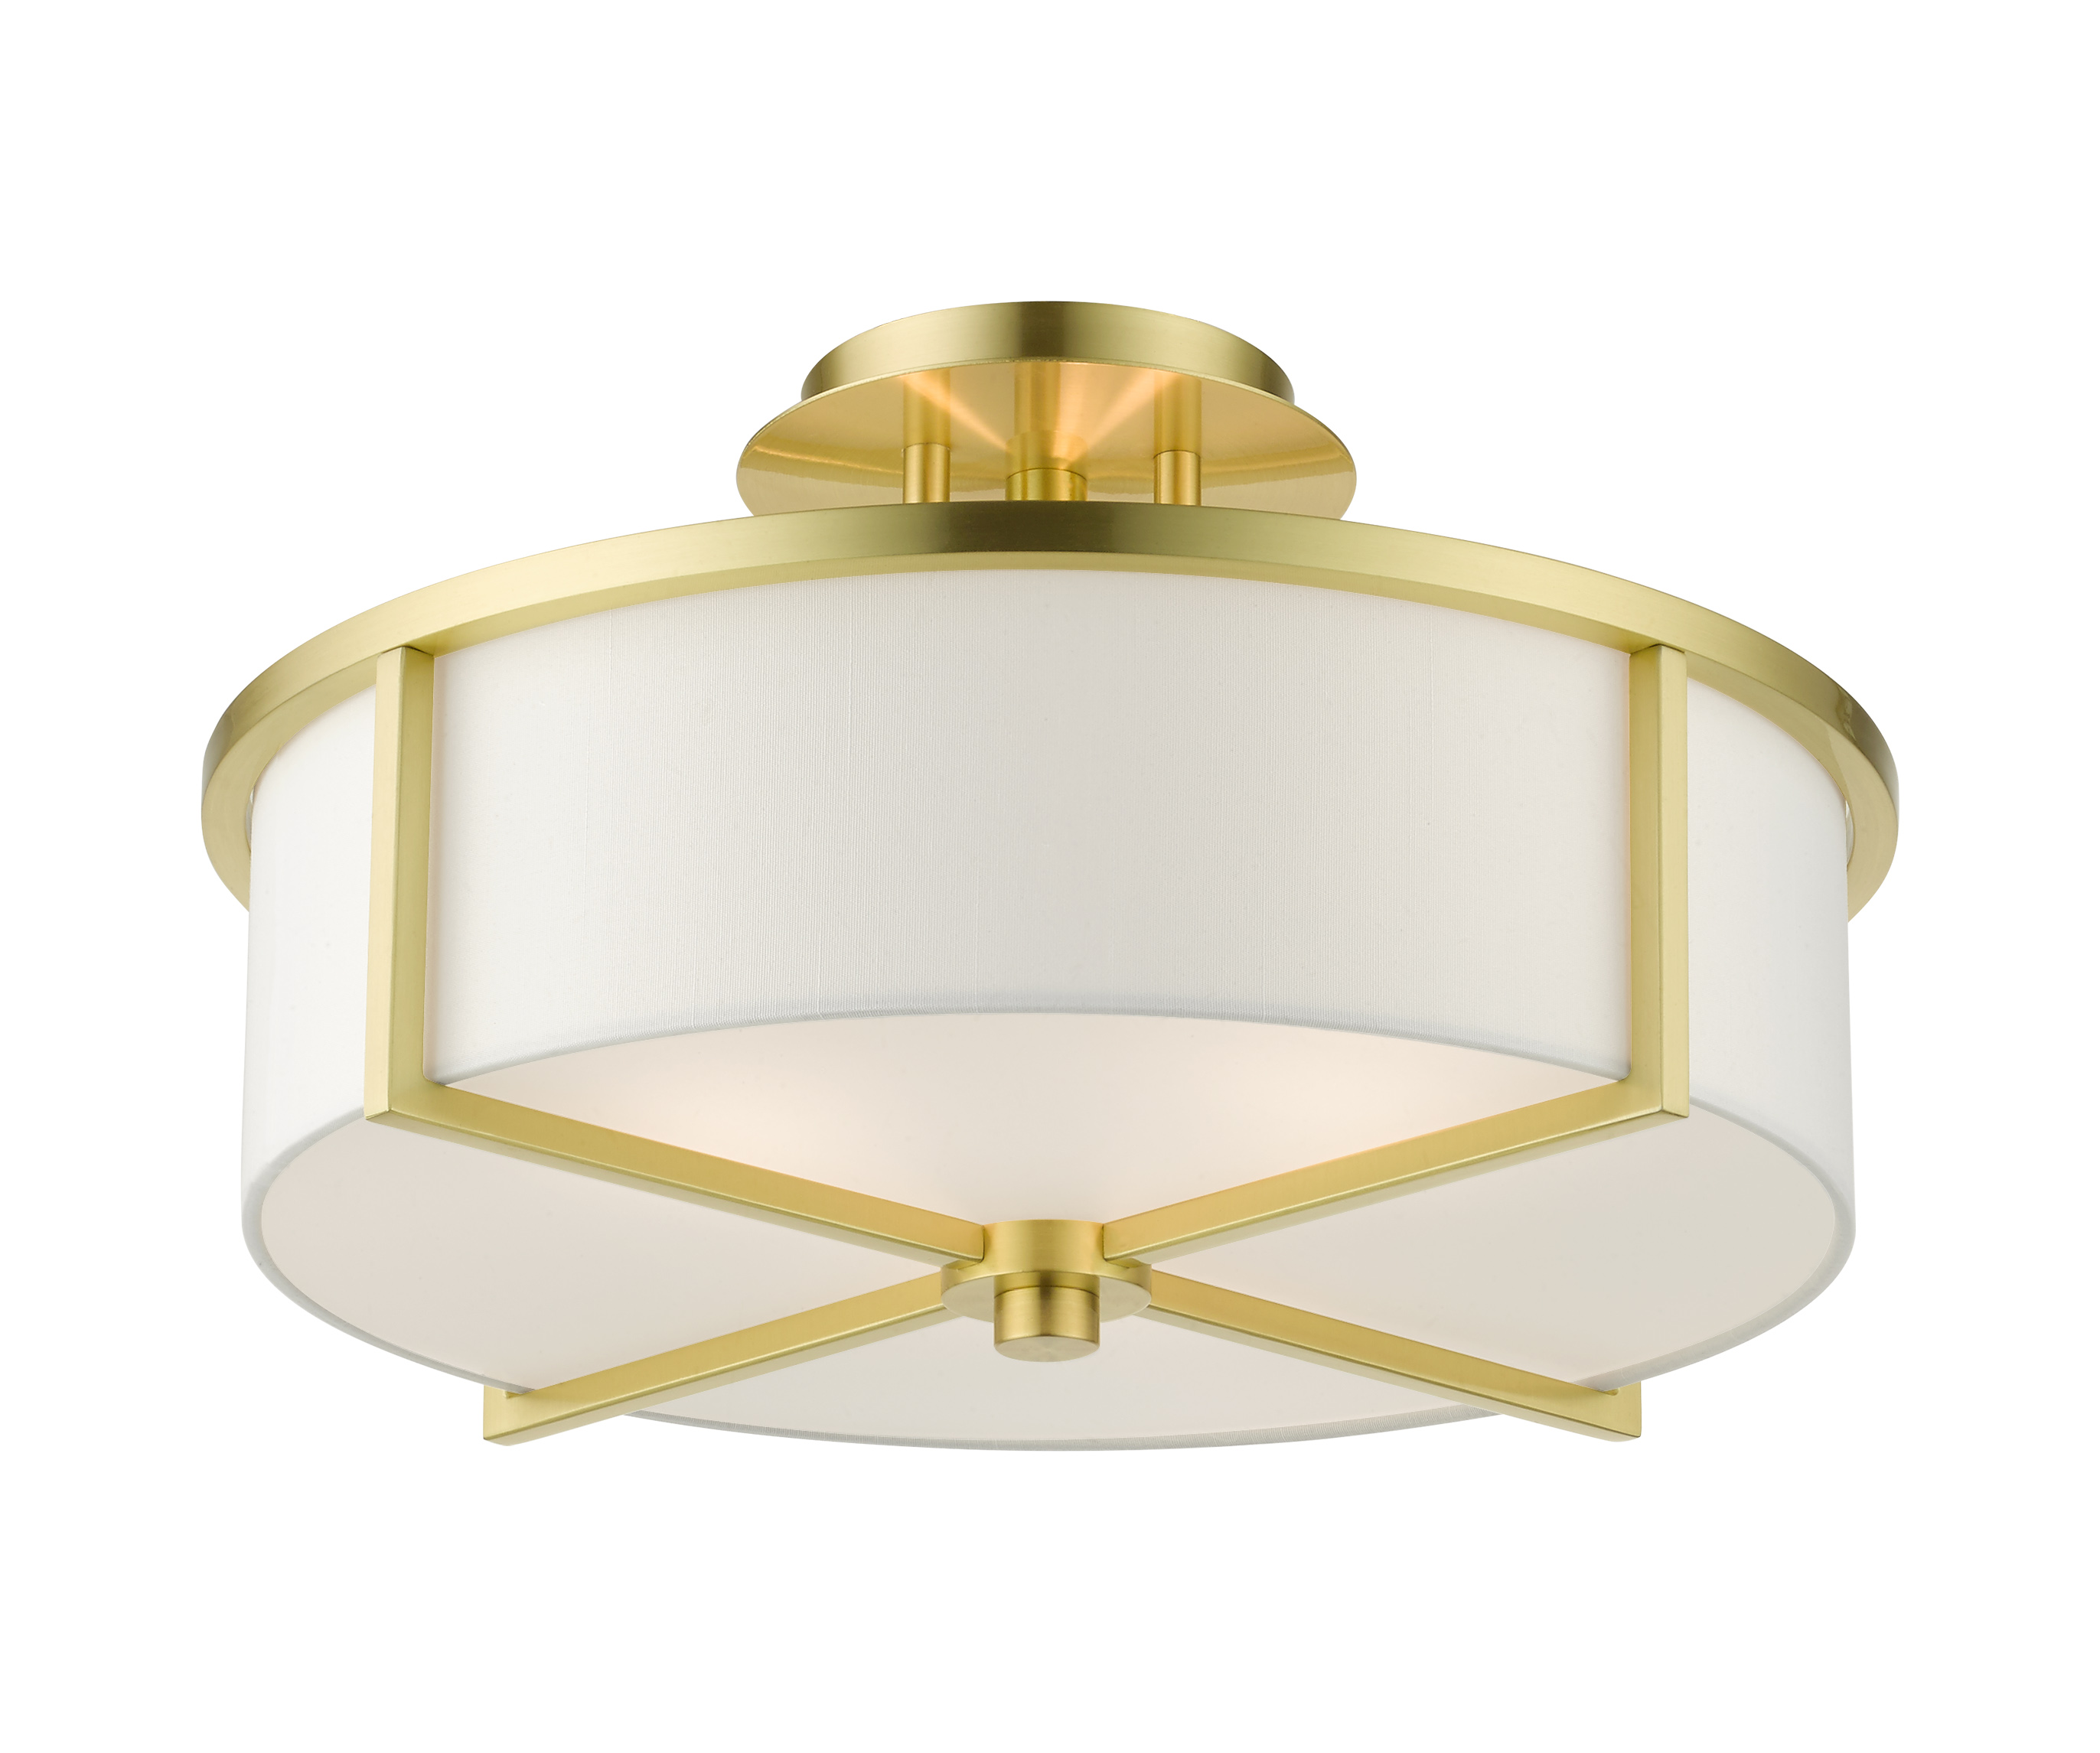 Livex Lighting 51074-12 Wesley Collection 3-Light Semi Flush Mount Ceiling Light with Off-White Hardback Fabric Shade Satin Brass